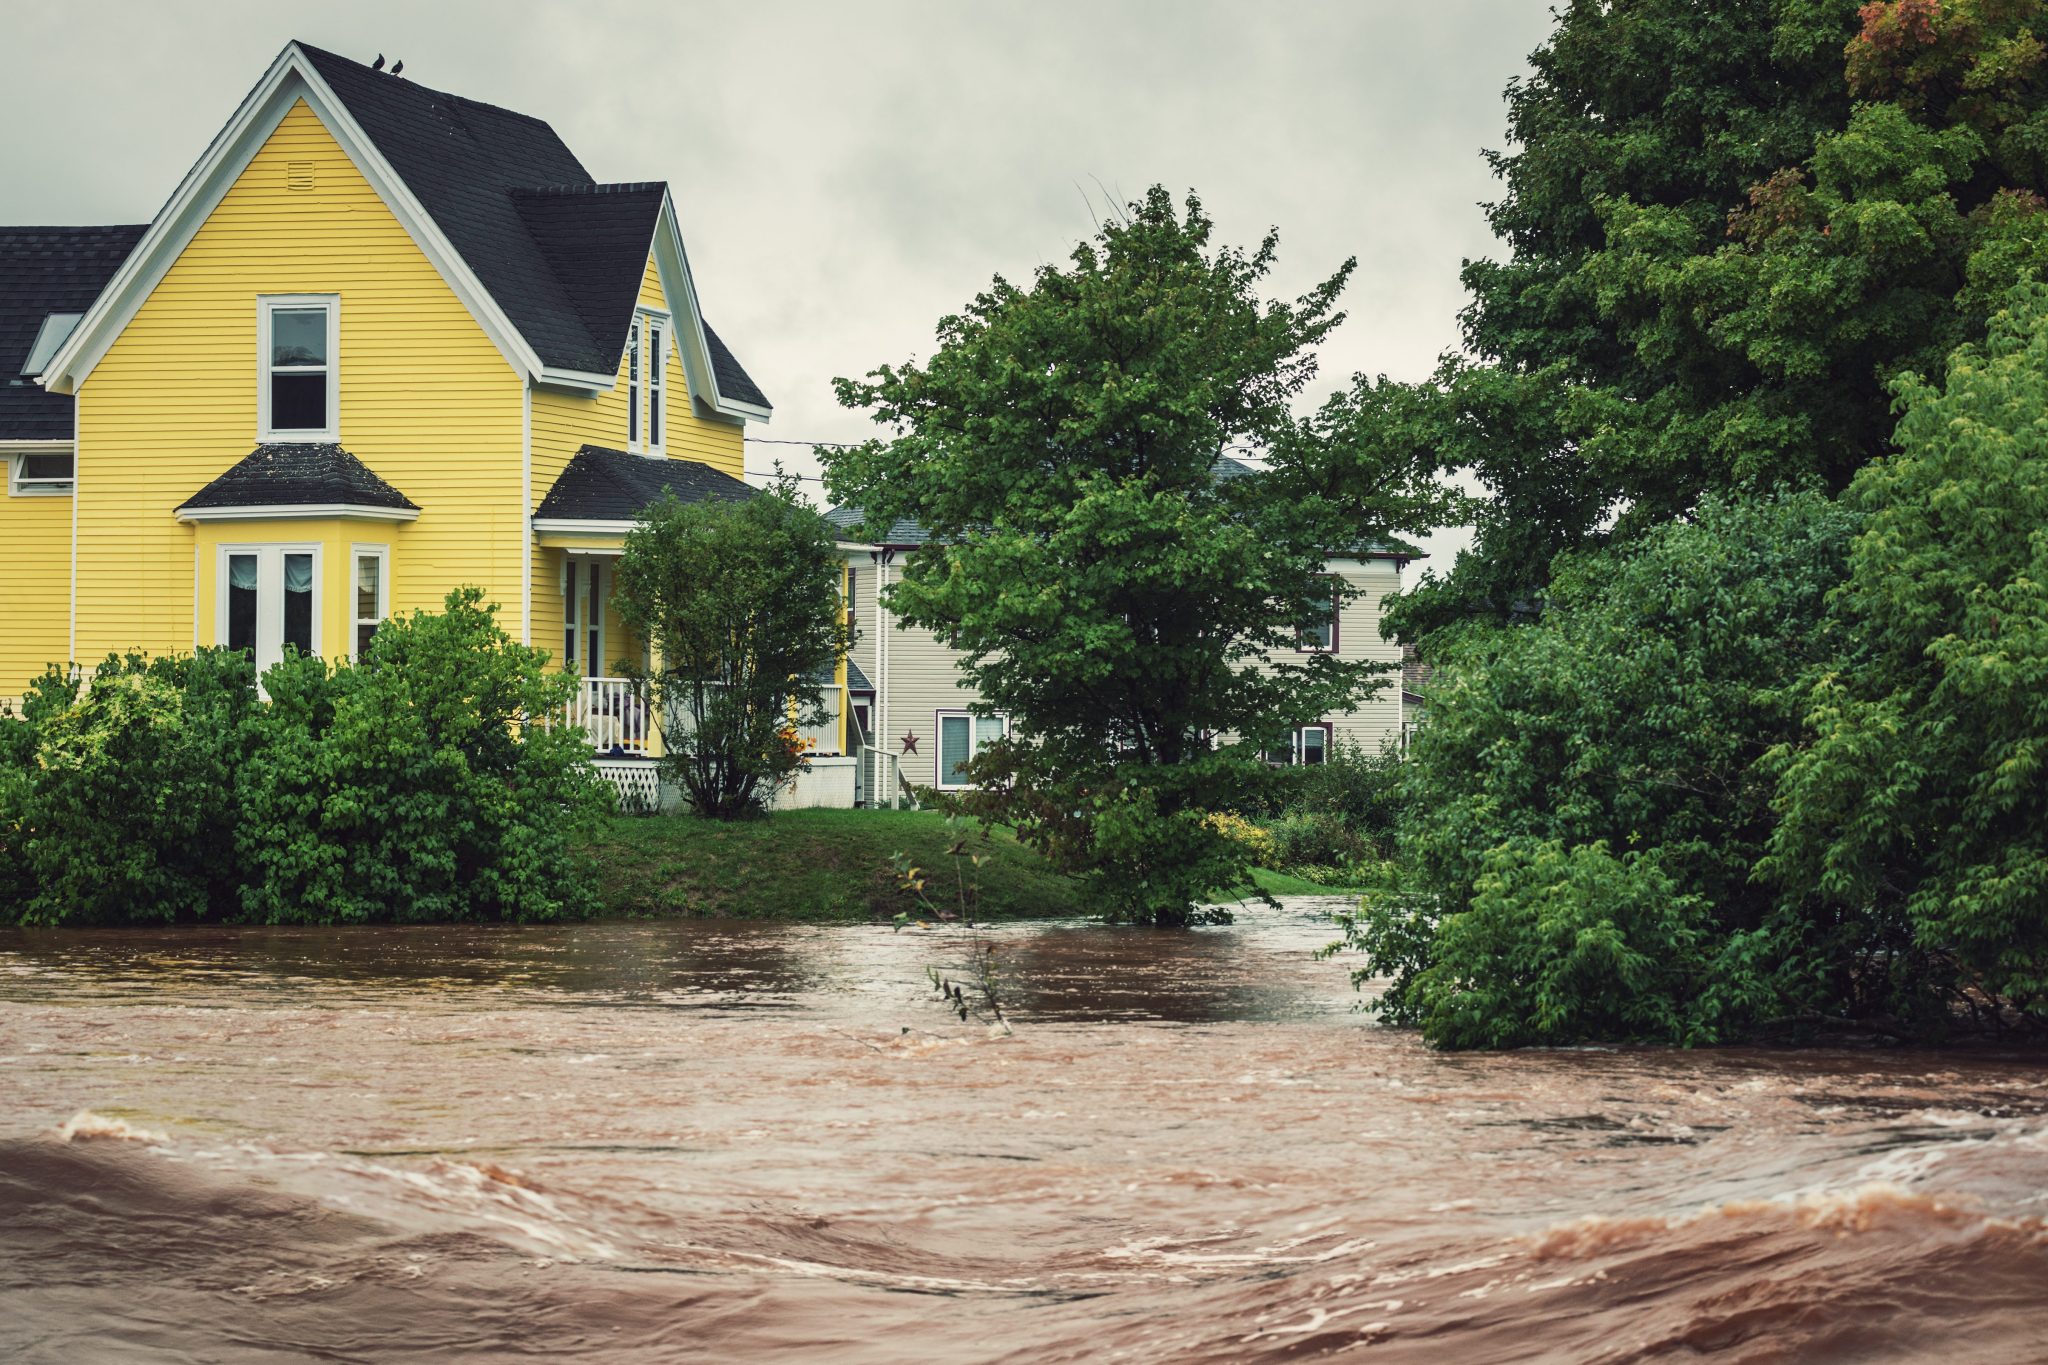 yellow house near a raging river overflowing its banks